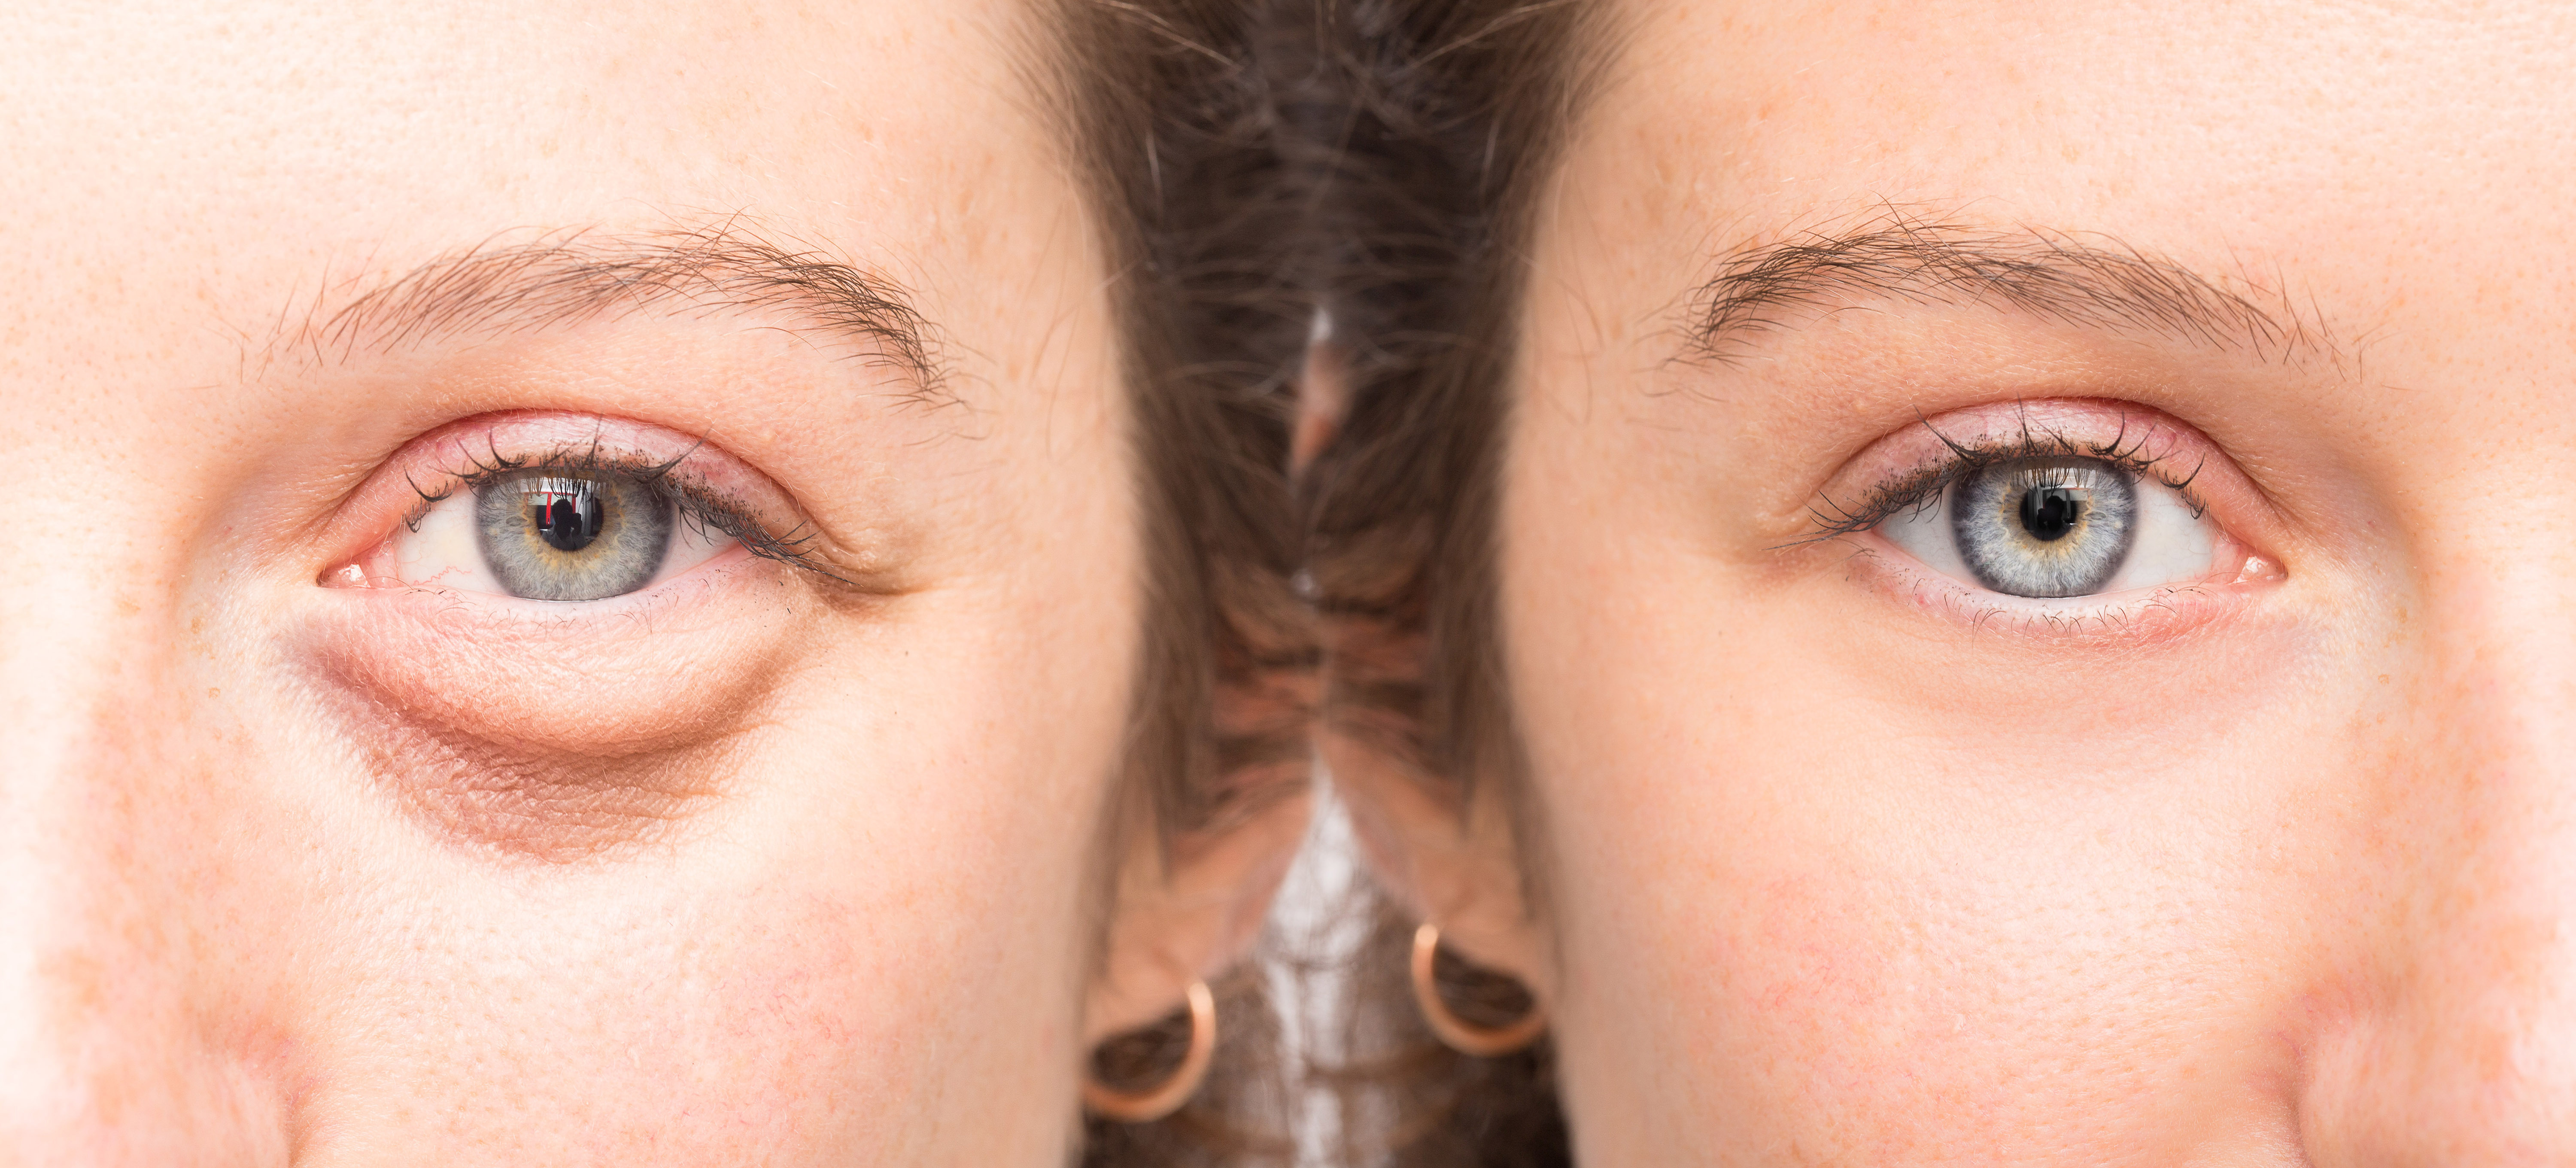 Can I Reduce My Eye Bags Naturally or Do I Need Surgery